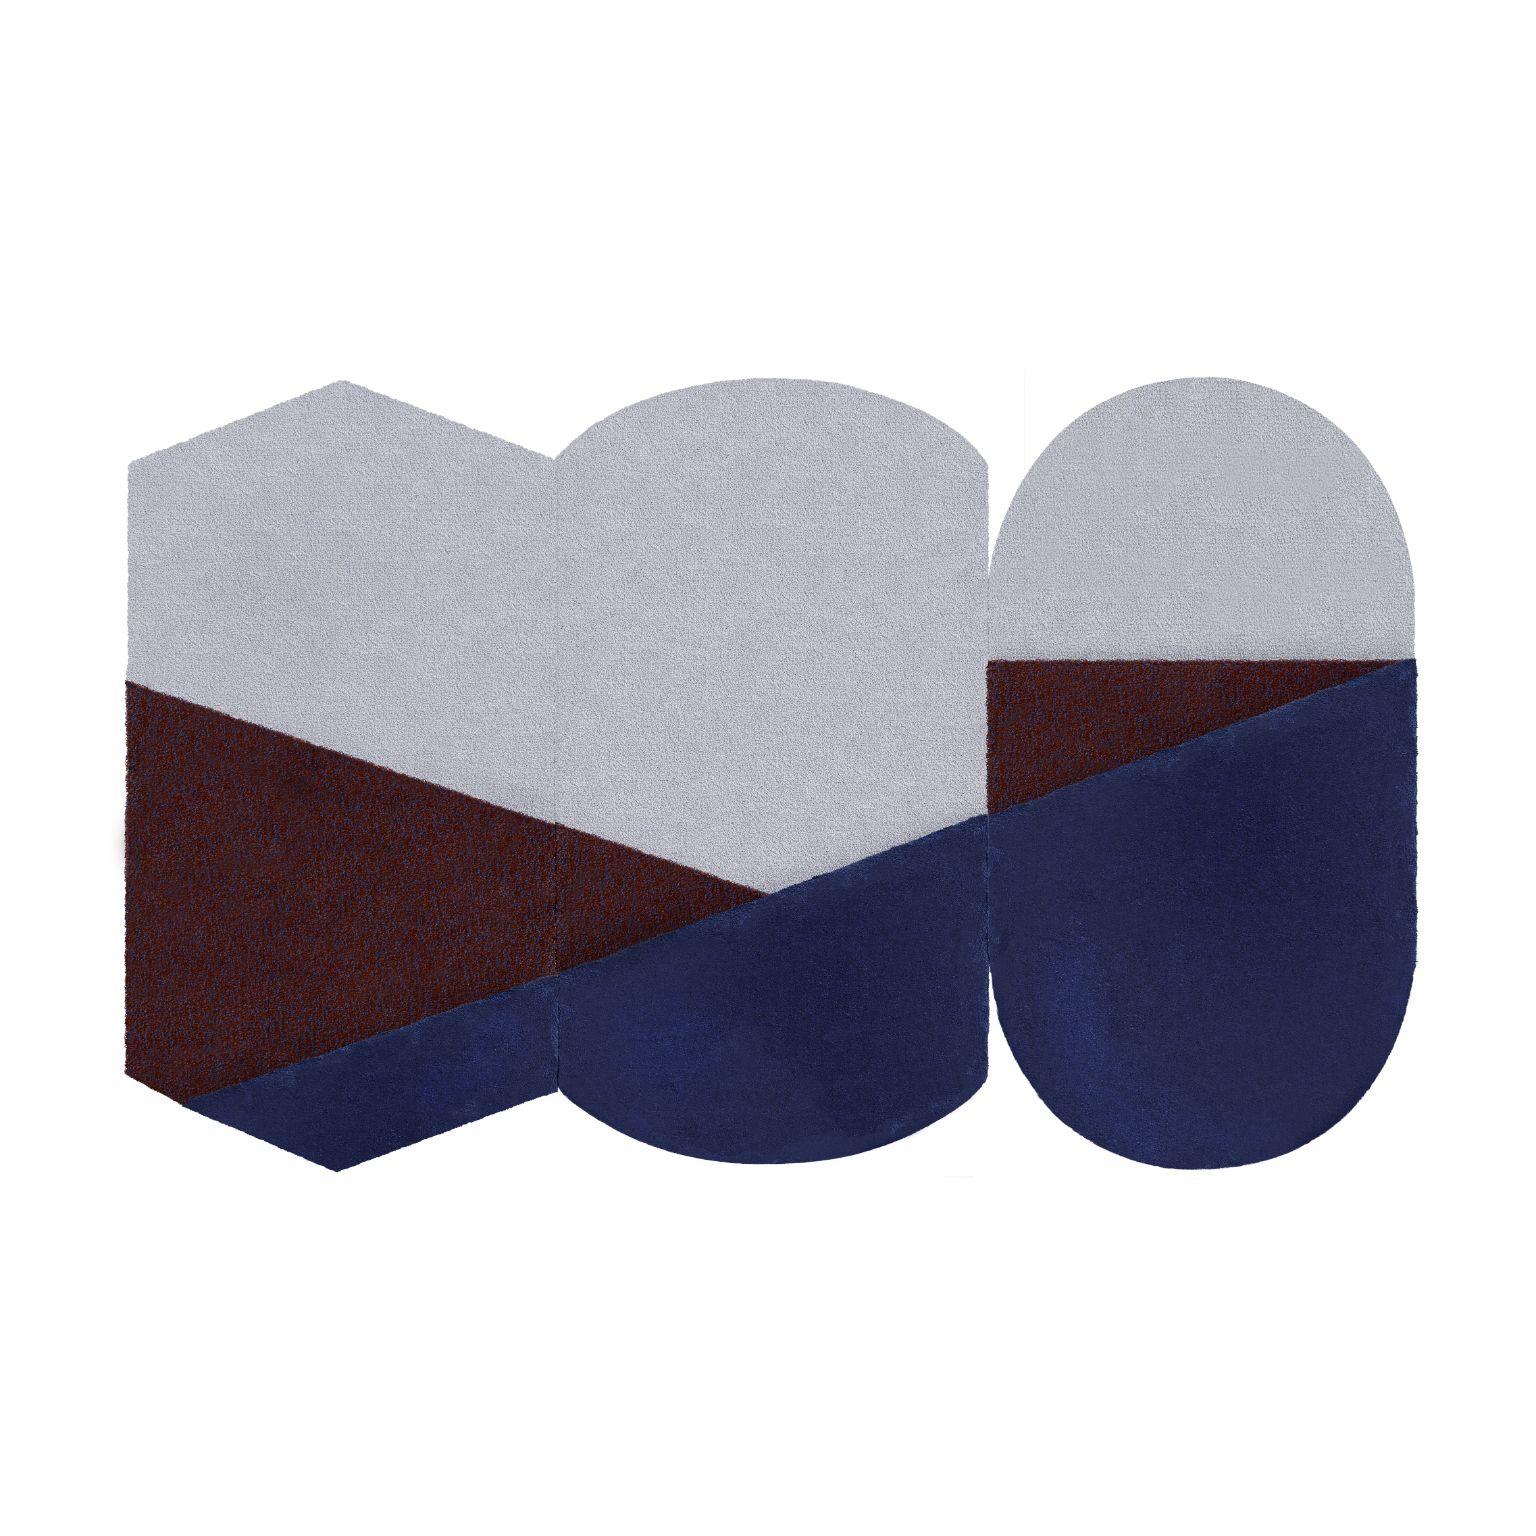 Small Blue Oci Triptych Rug by Seraina Lareida
Dimensions: 210 x 1300 cm
Materials: 100% New Zealand top-quality wool.
Available in sizes Medium or Large. Also available in colors: Brick/Pink, Yellow/Gray, Green/Brick, Blue/Brick. Customizable size